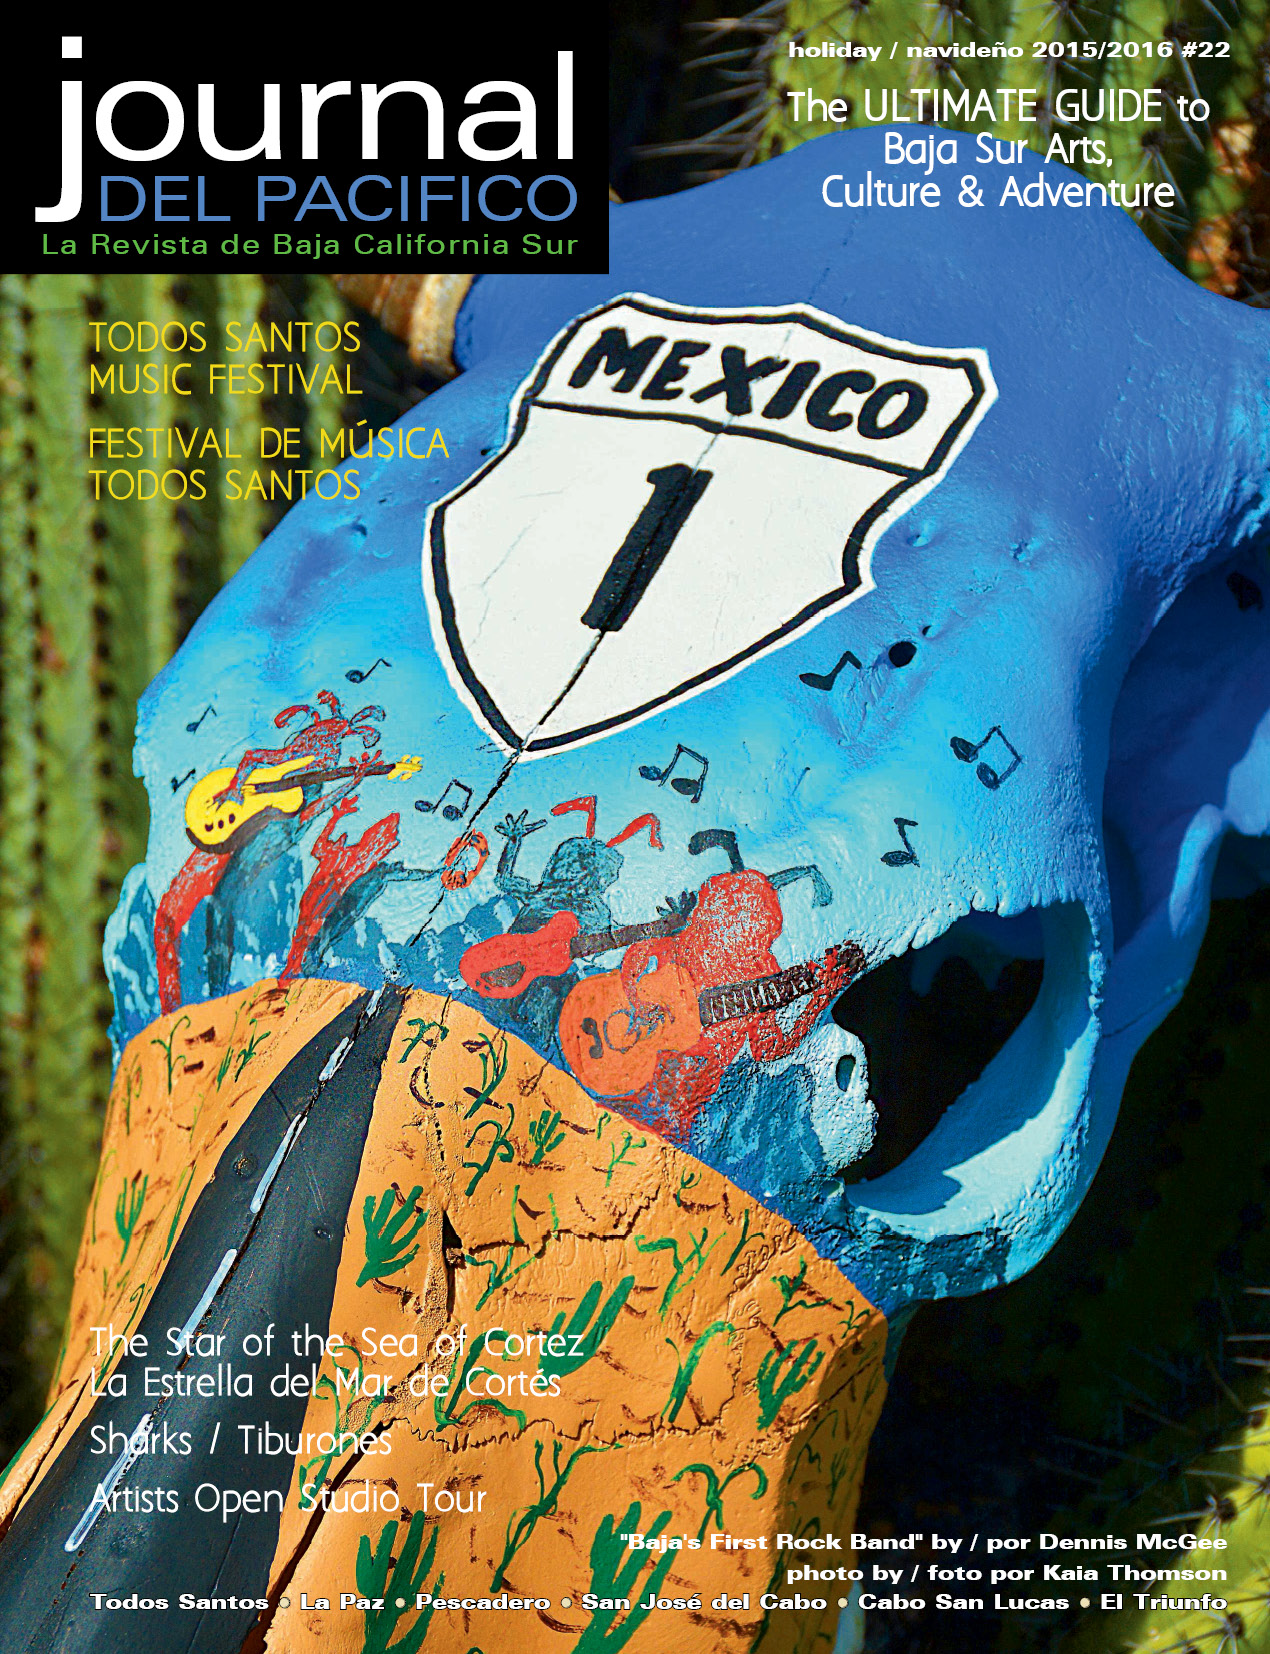 Holiday 2015 Issue of Journal del Pacifico